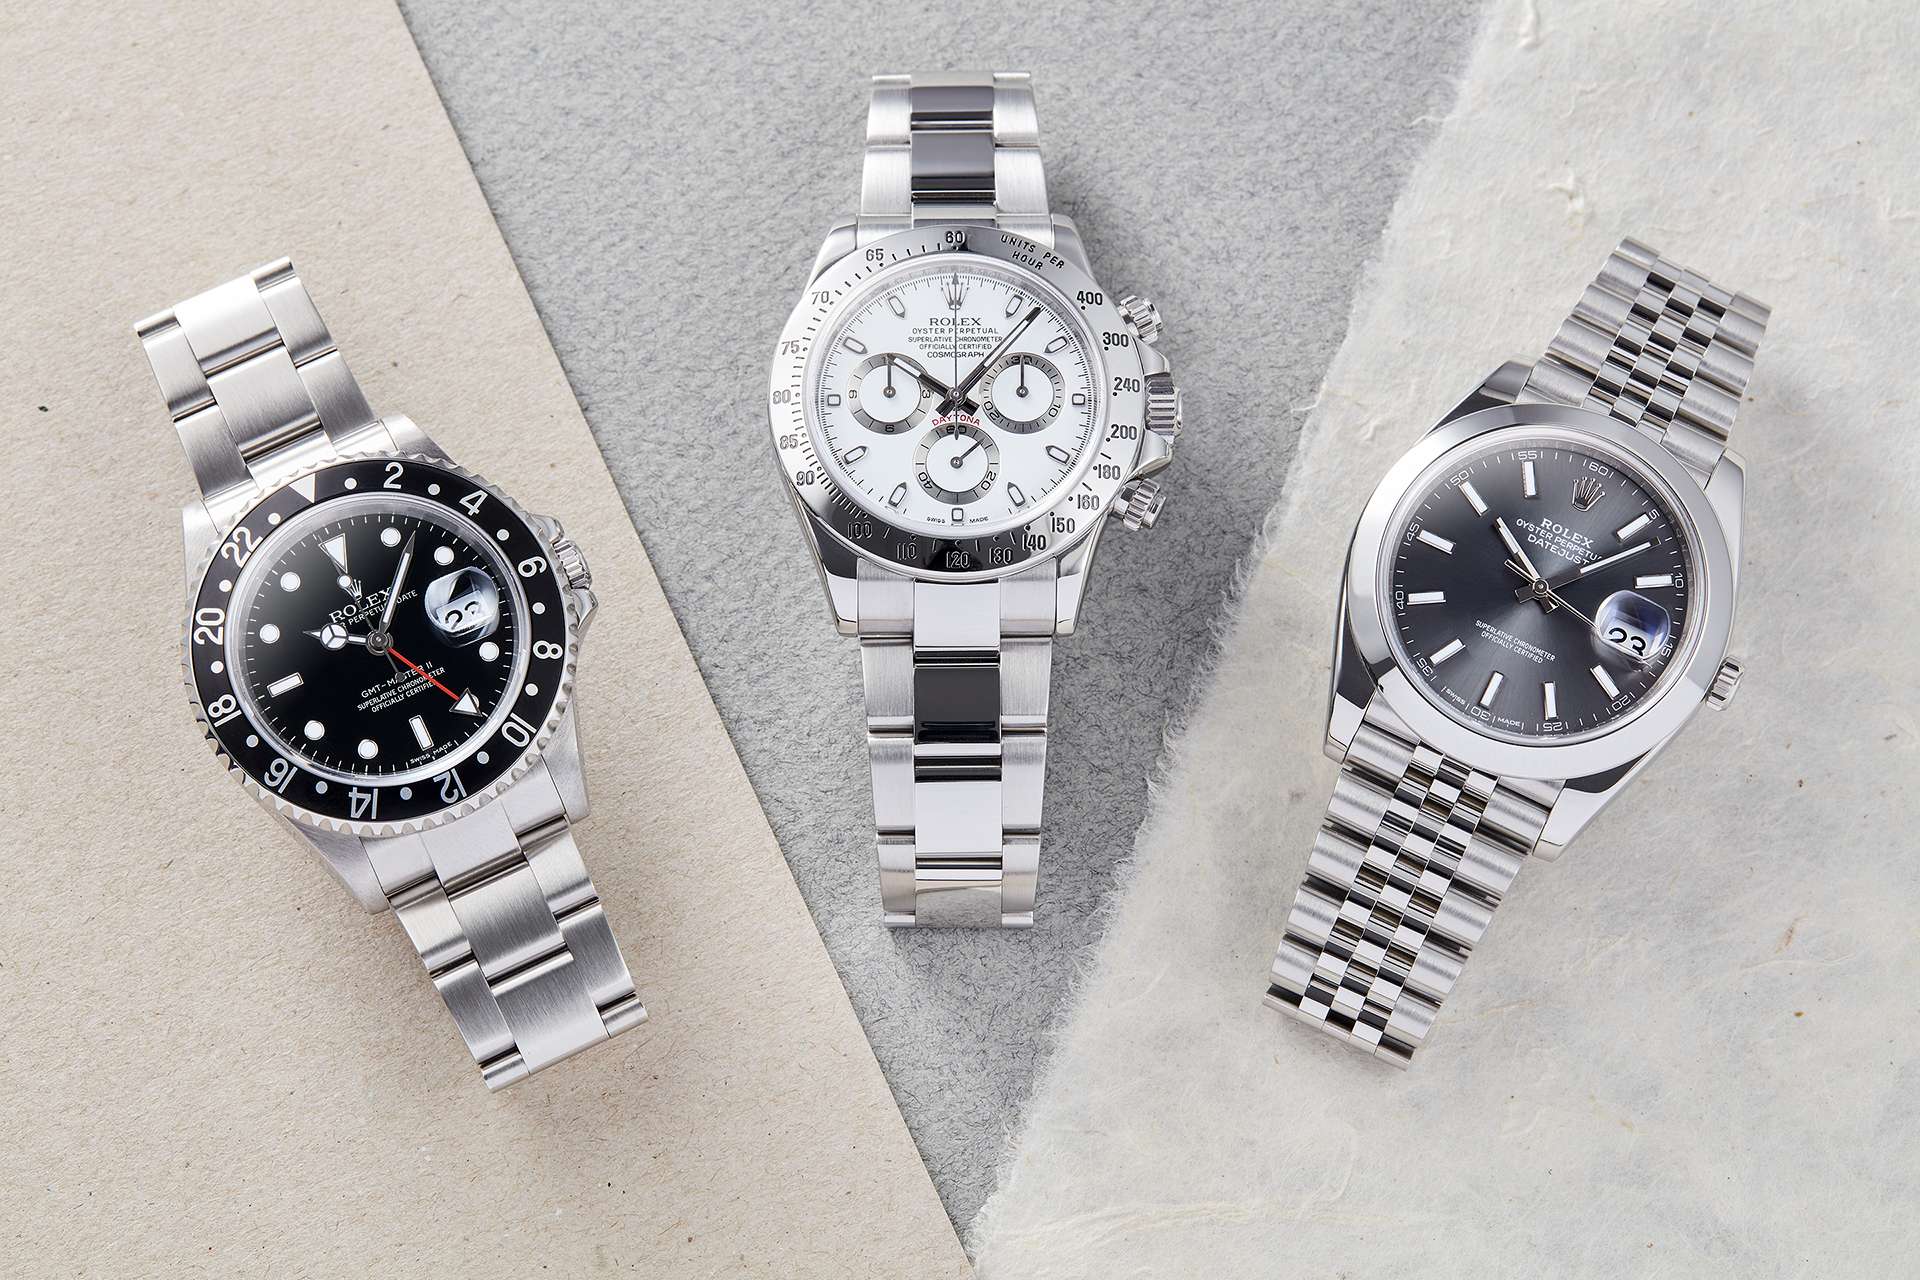 Certified Pre-Owned Watches – The 5 